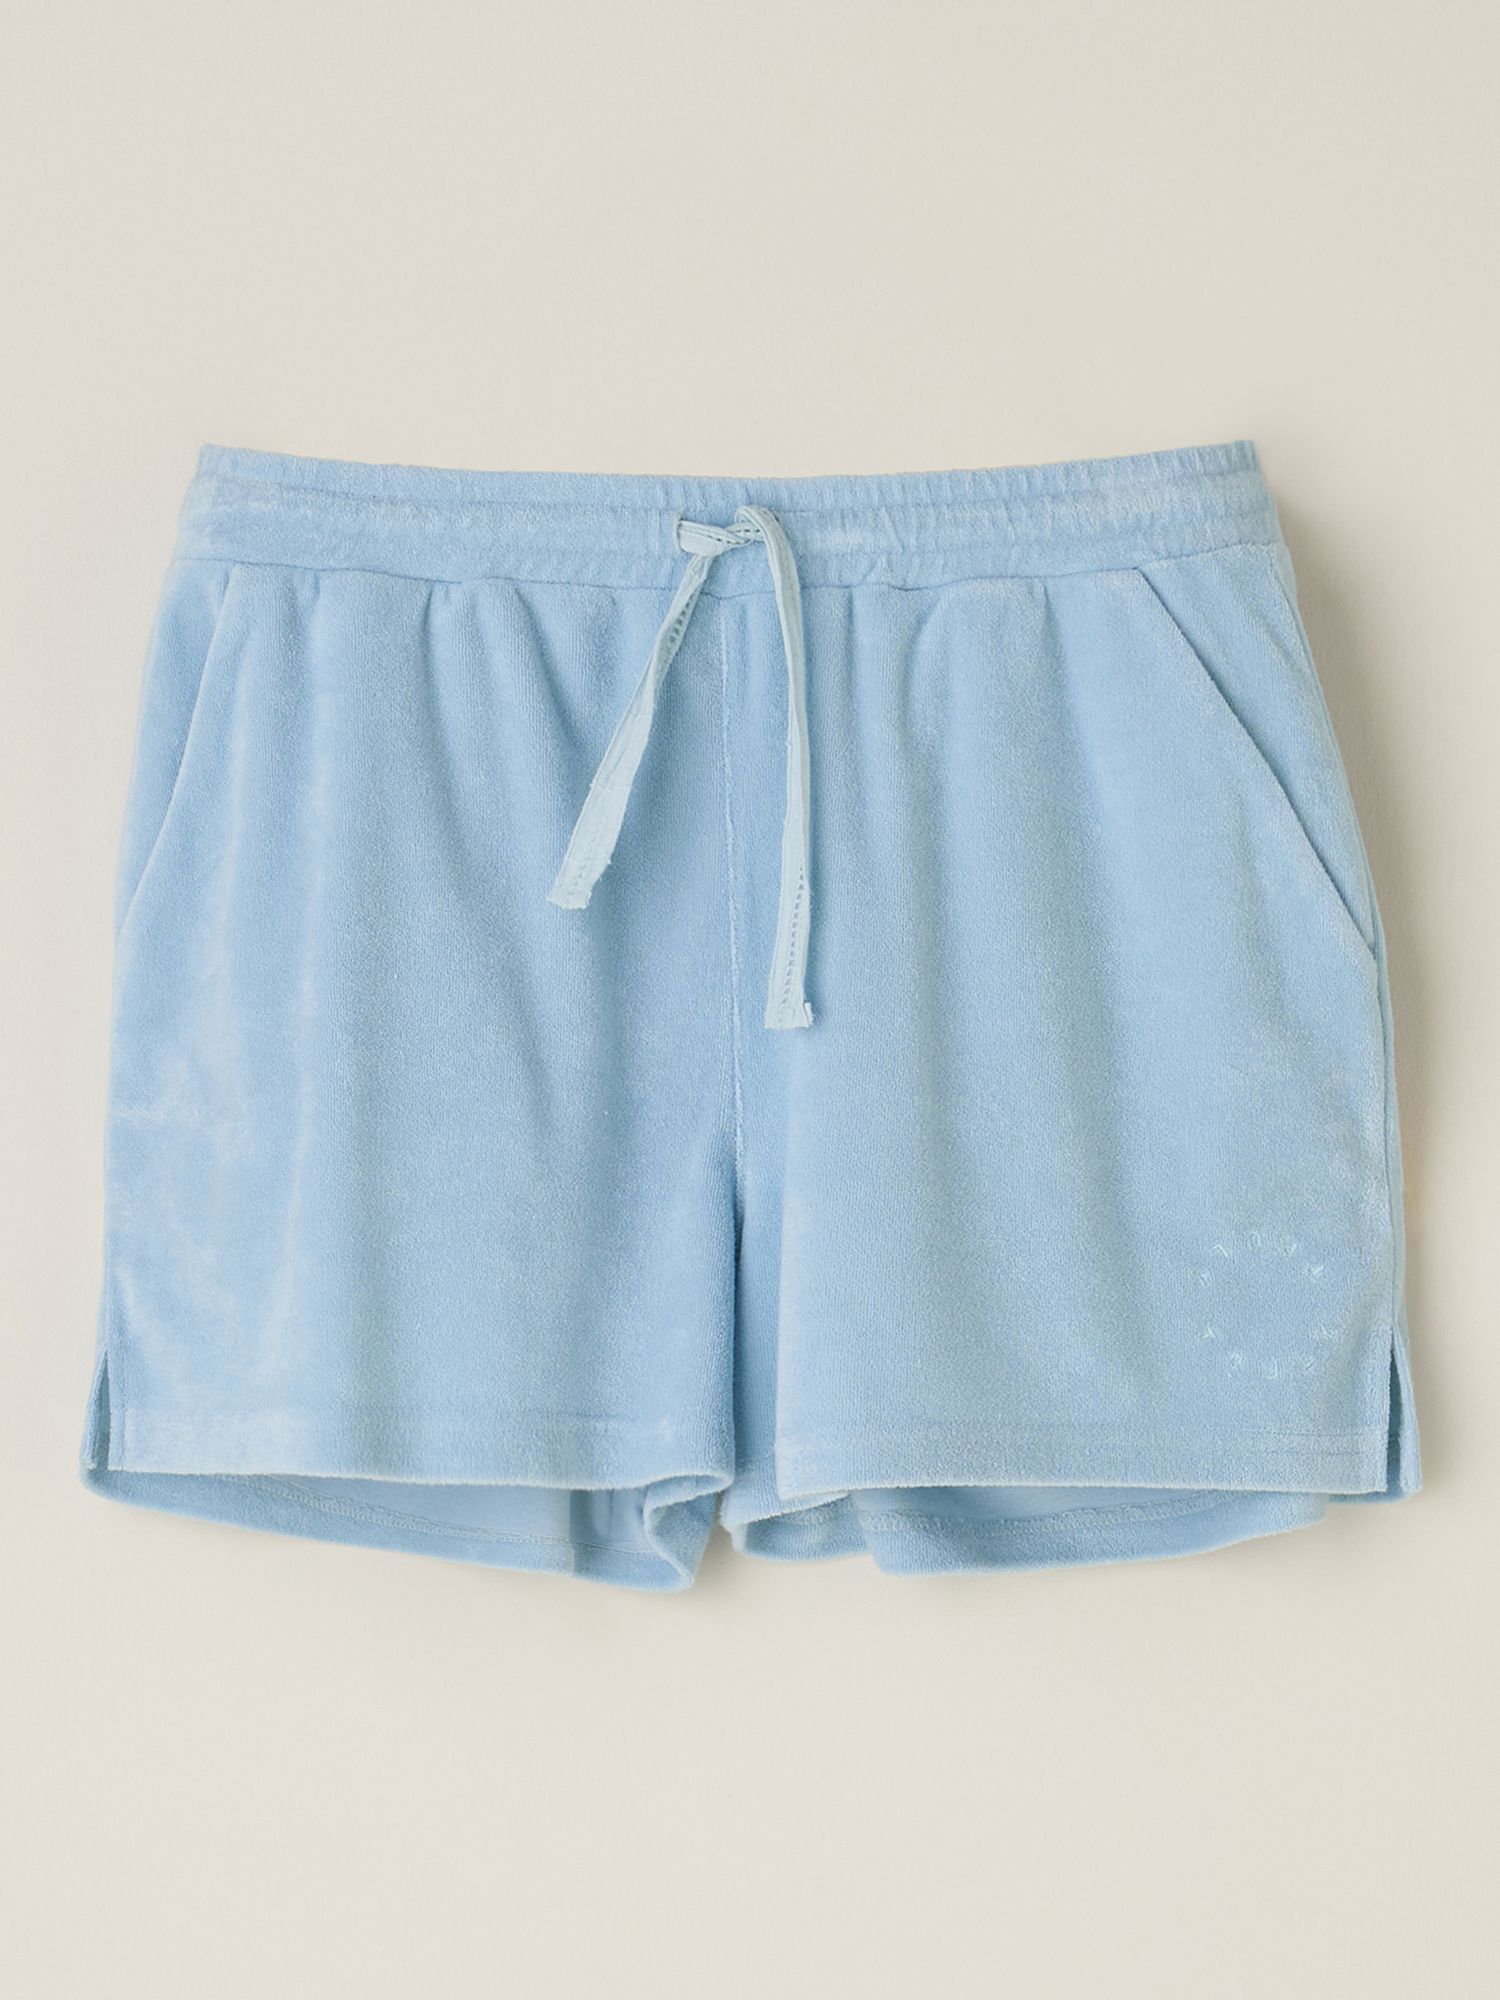 Buy Truly Terry Shorts Online at johnlewis.com